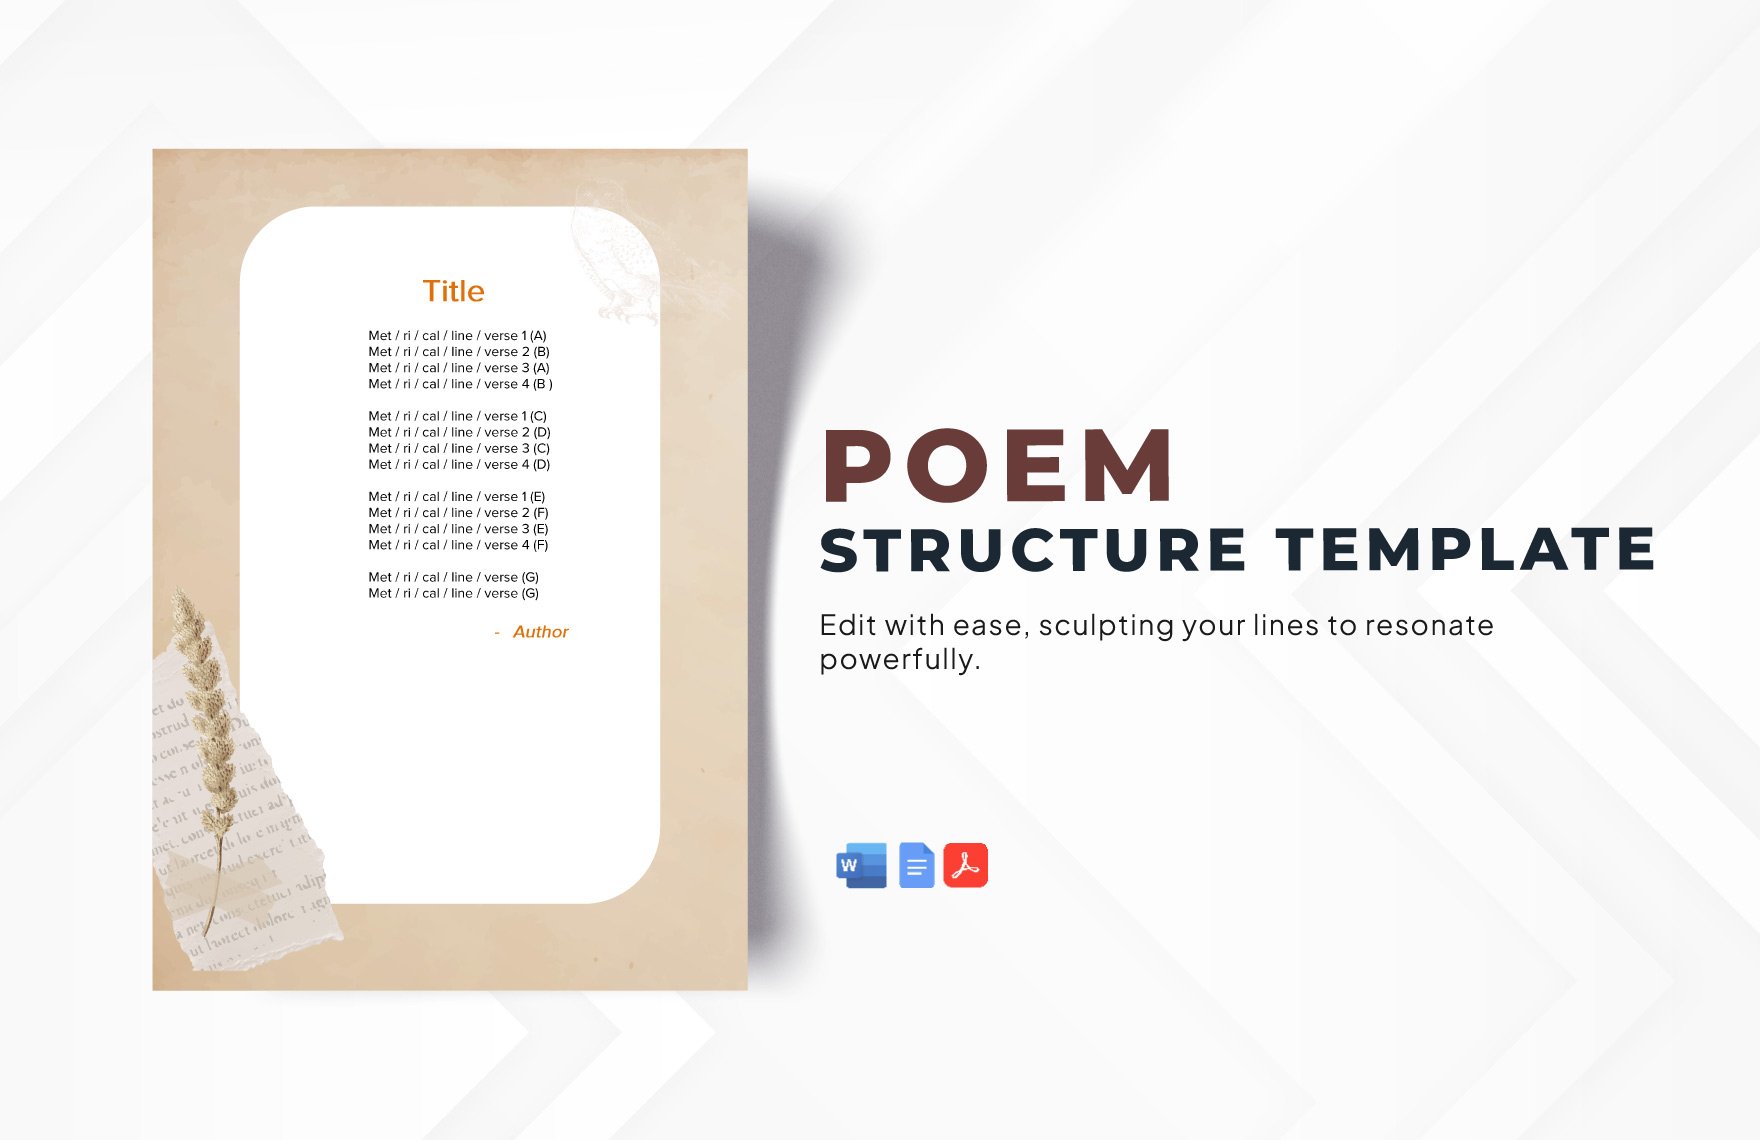 Poem Structure Template